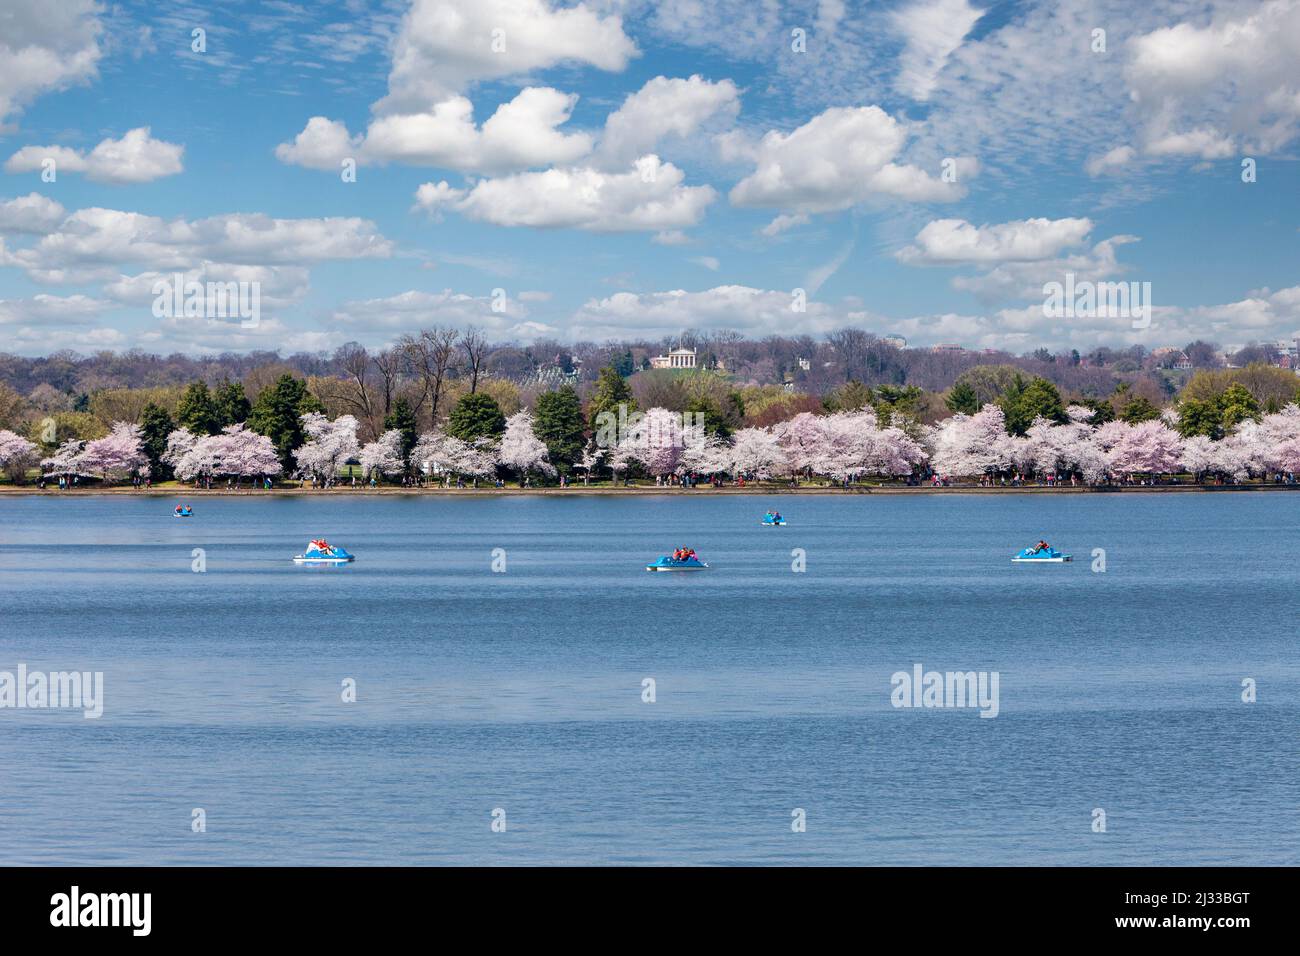 Washington, D.C., Cherry Blossoms.  Paddle-Boating on the Tidal Basin.  Custis-Lee Mansion on Hilltop in Background. Stock Photo